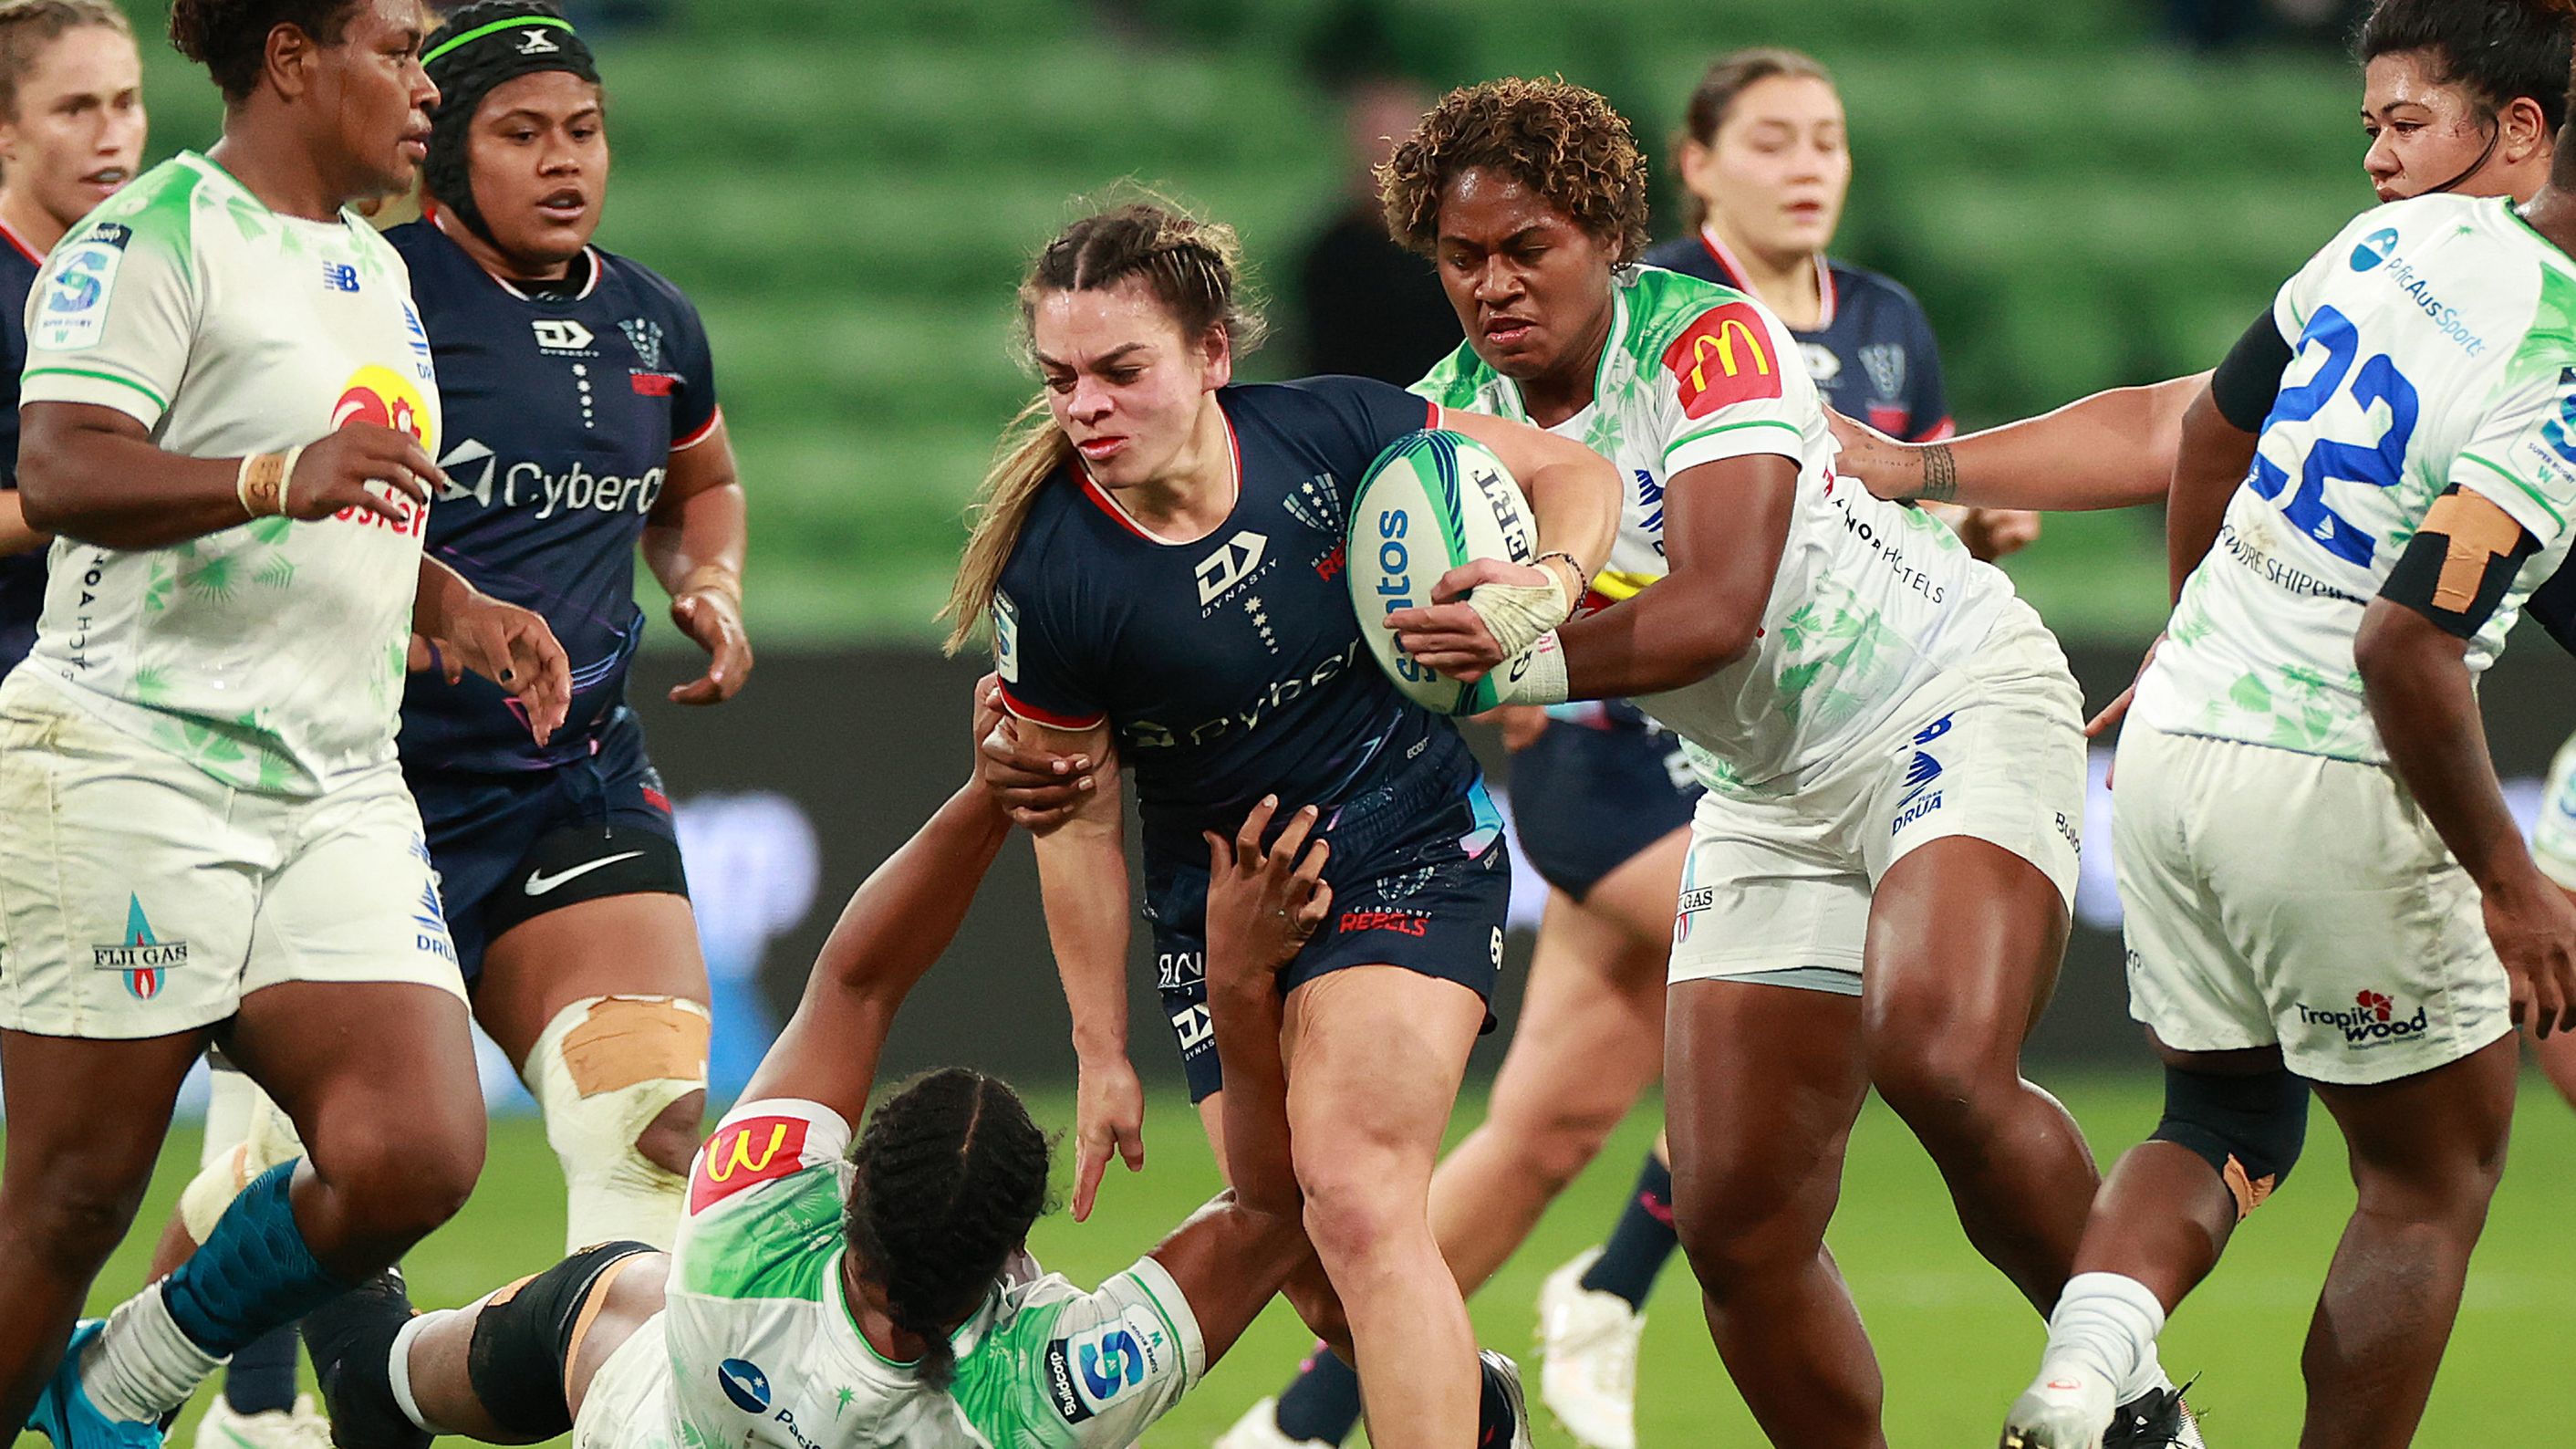 Jayme Nuku of the Rebels runs with the ball during the round five Super Rugby Women&#x27;s match between Melbourne Rebels and Fijian Drua.